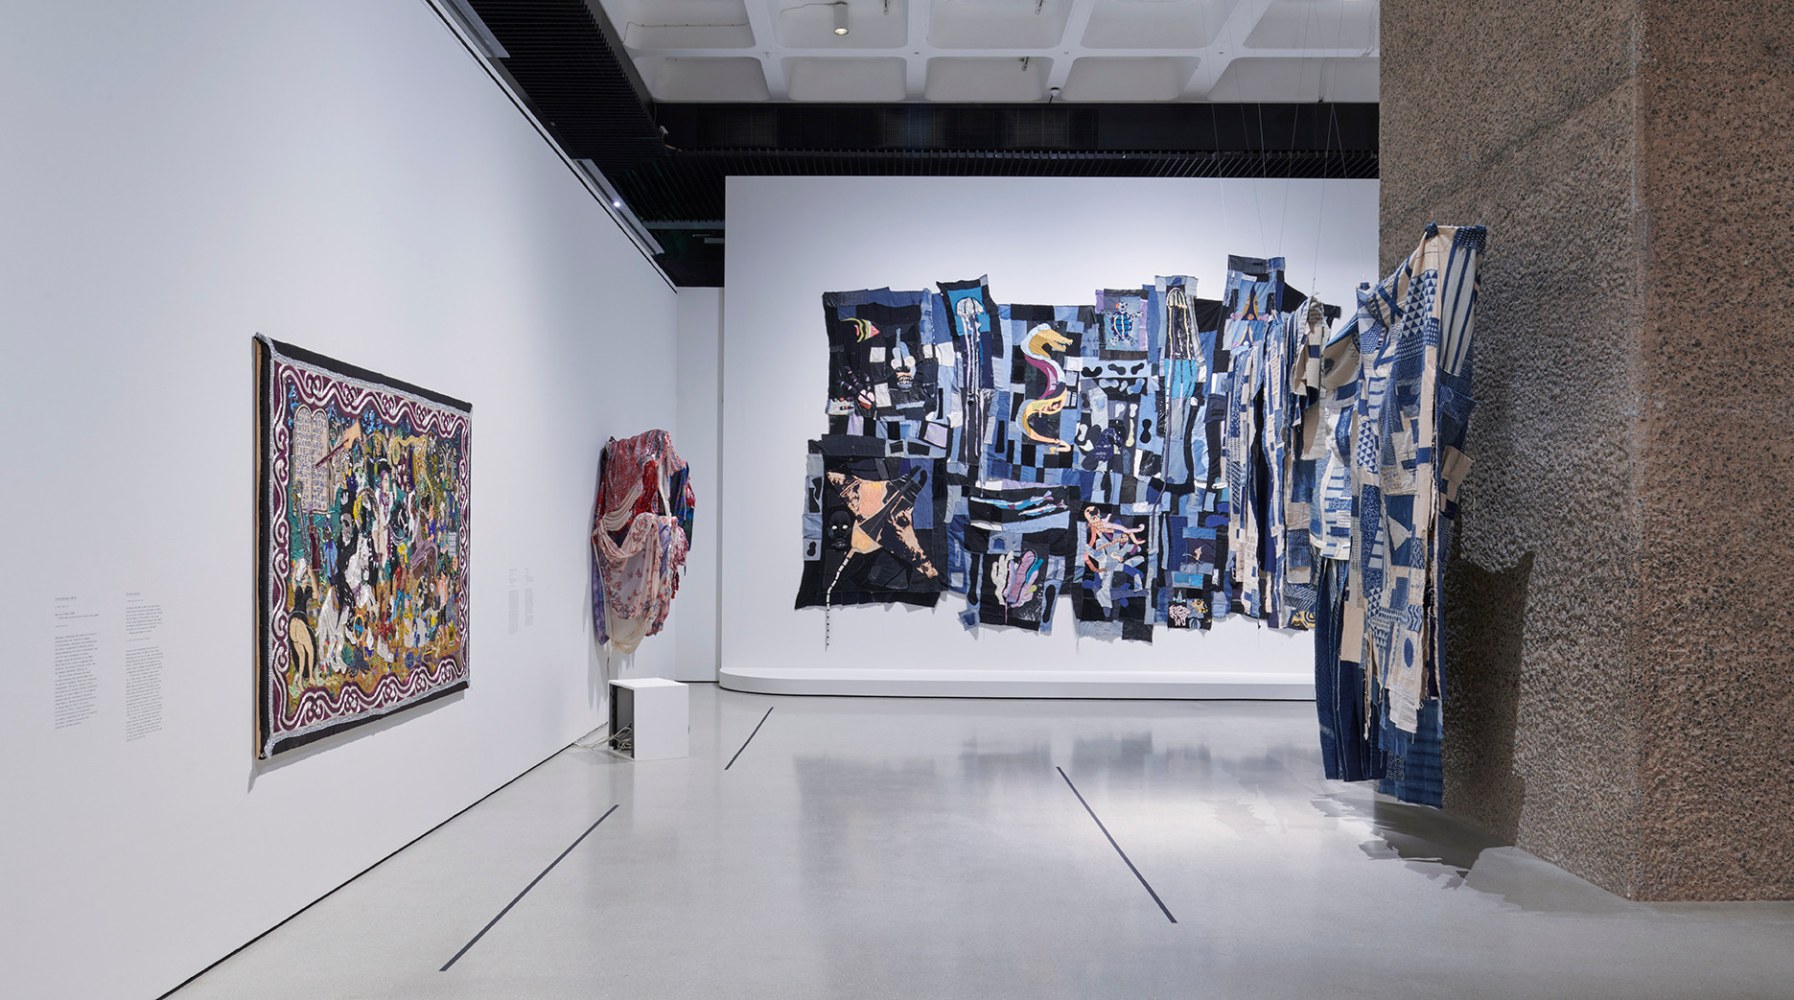 Installation view at Barbican Art Gallery with four textile art works